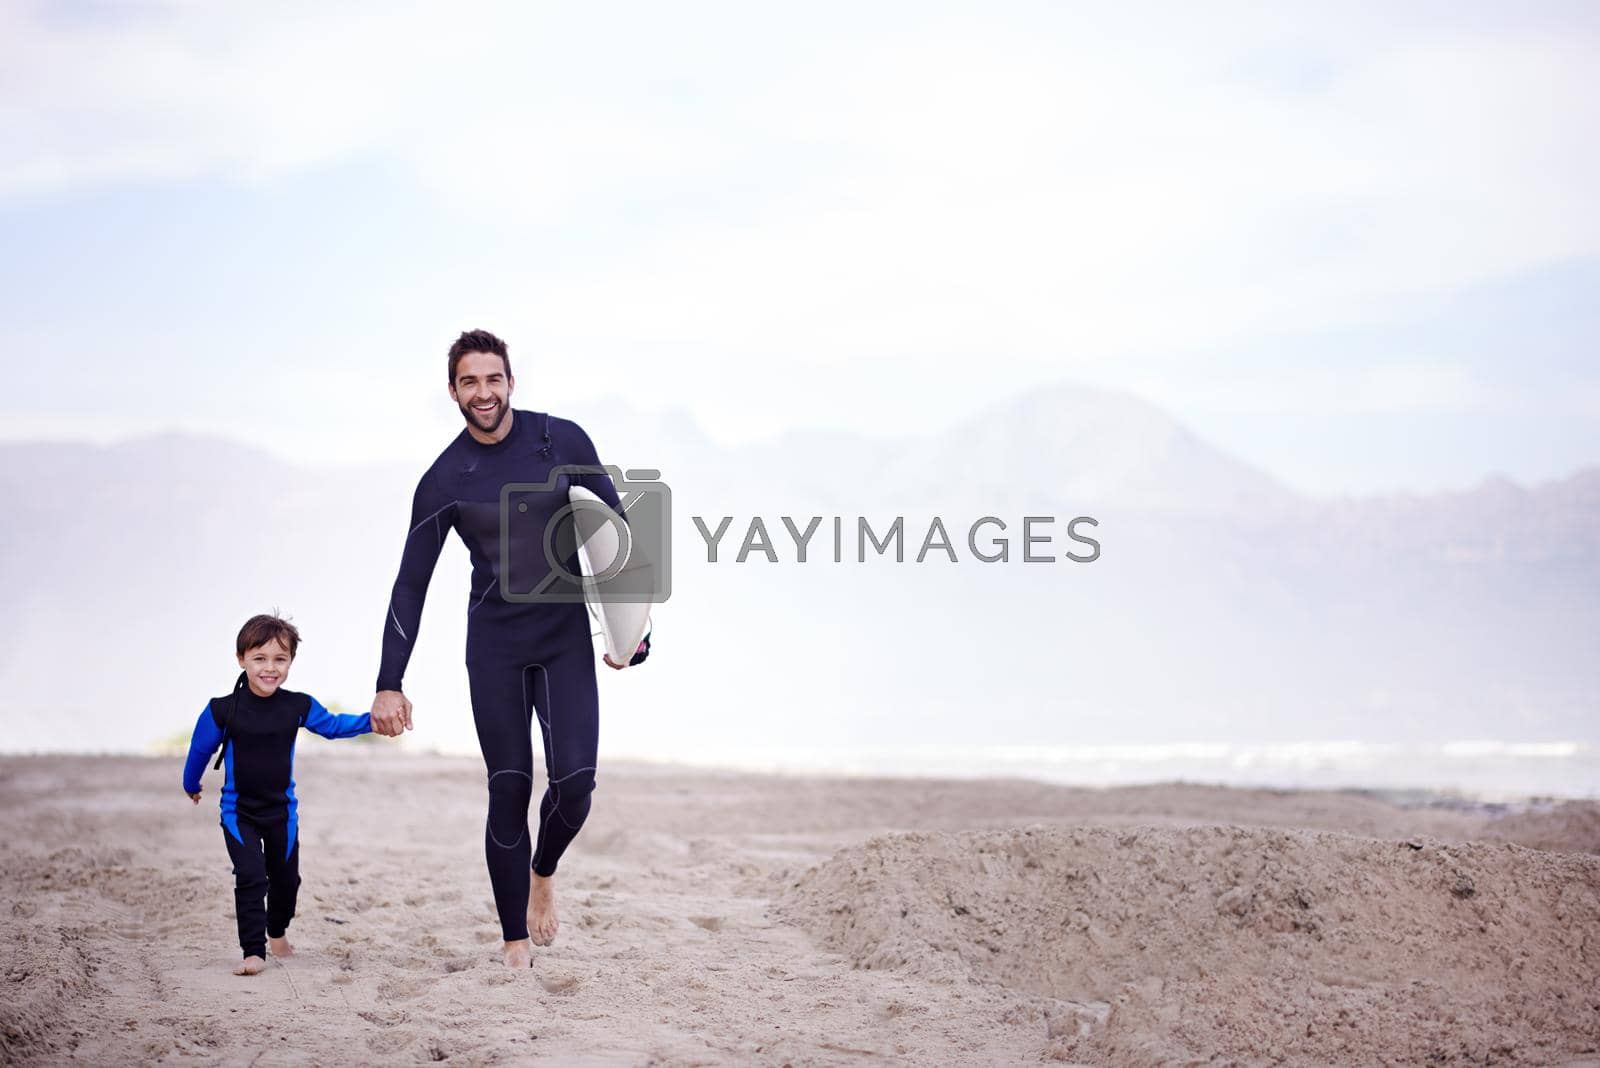 A father walking along the beach with his young son before a surfing lesson.